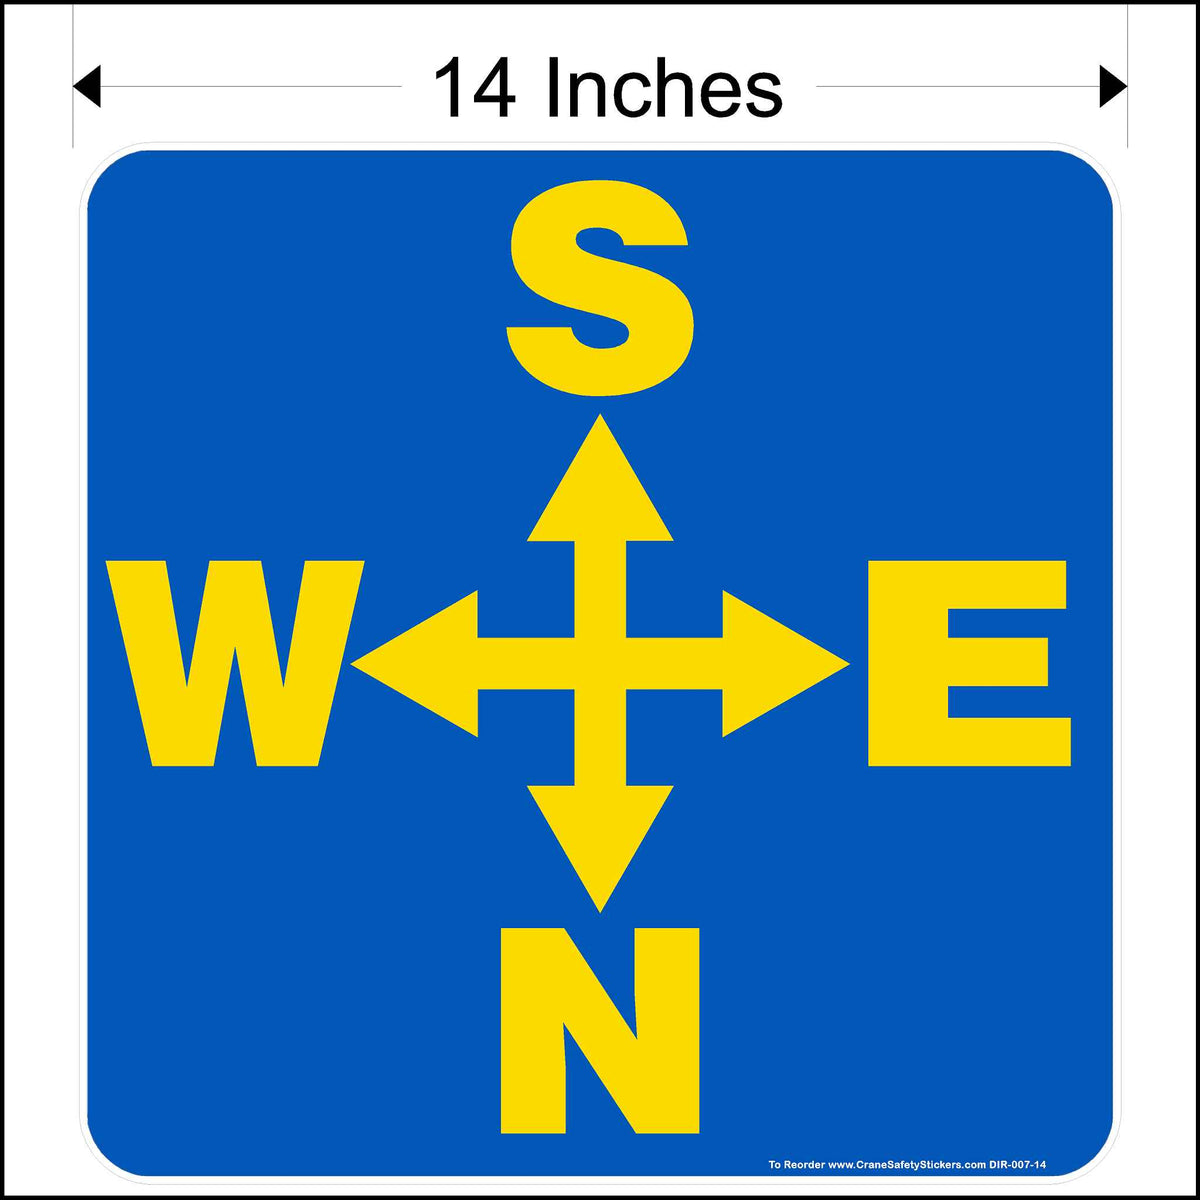 Fourteen inch overhead crane decal printed with yellow south, notrth, east, and west arrows on a blue background.